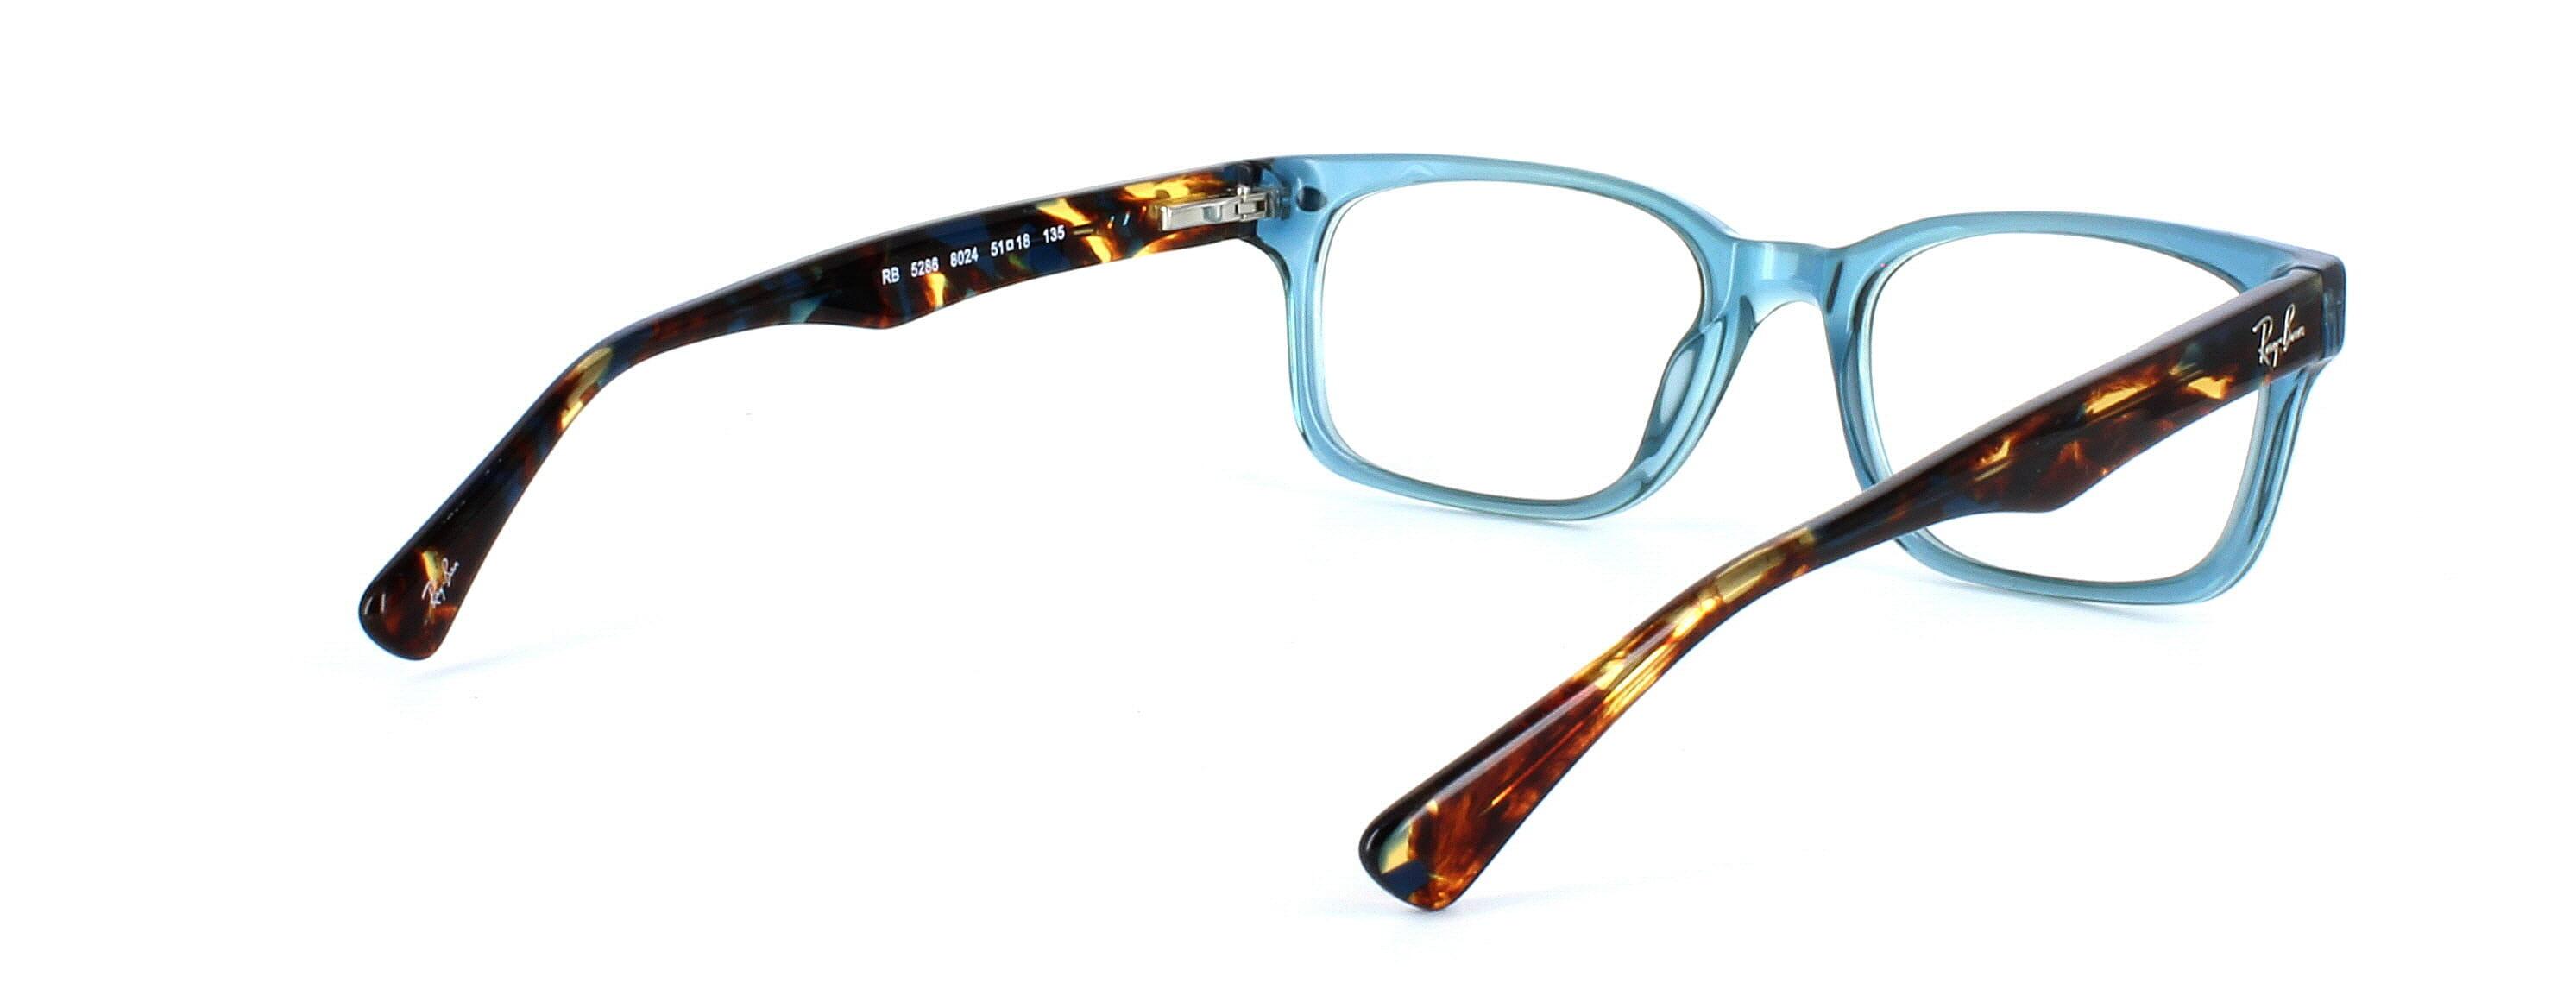 Ray Ban glasses - model 5286 8024 - unisex acetate clear blue and tortoise - image 5